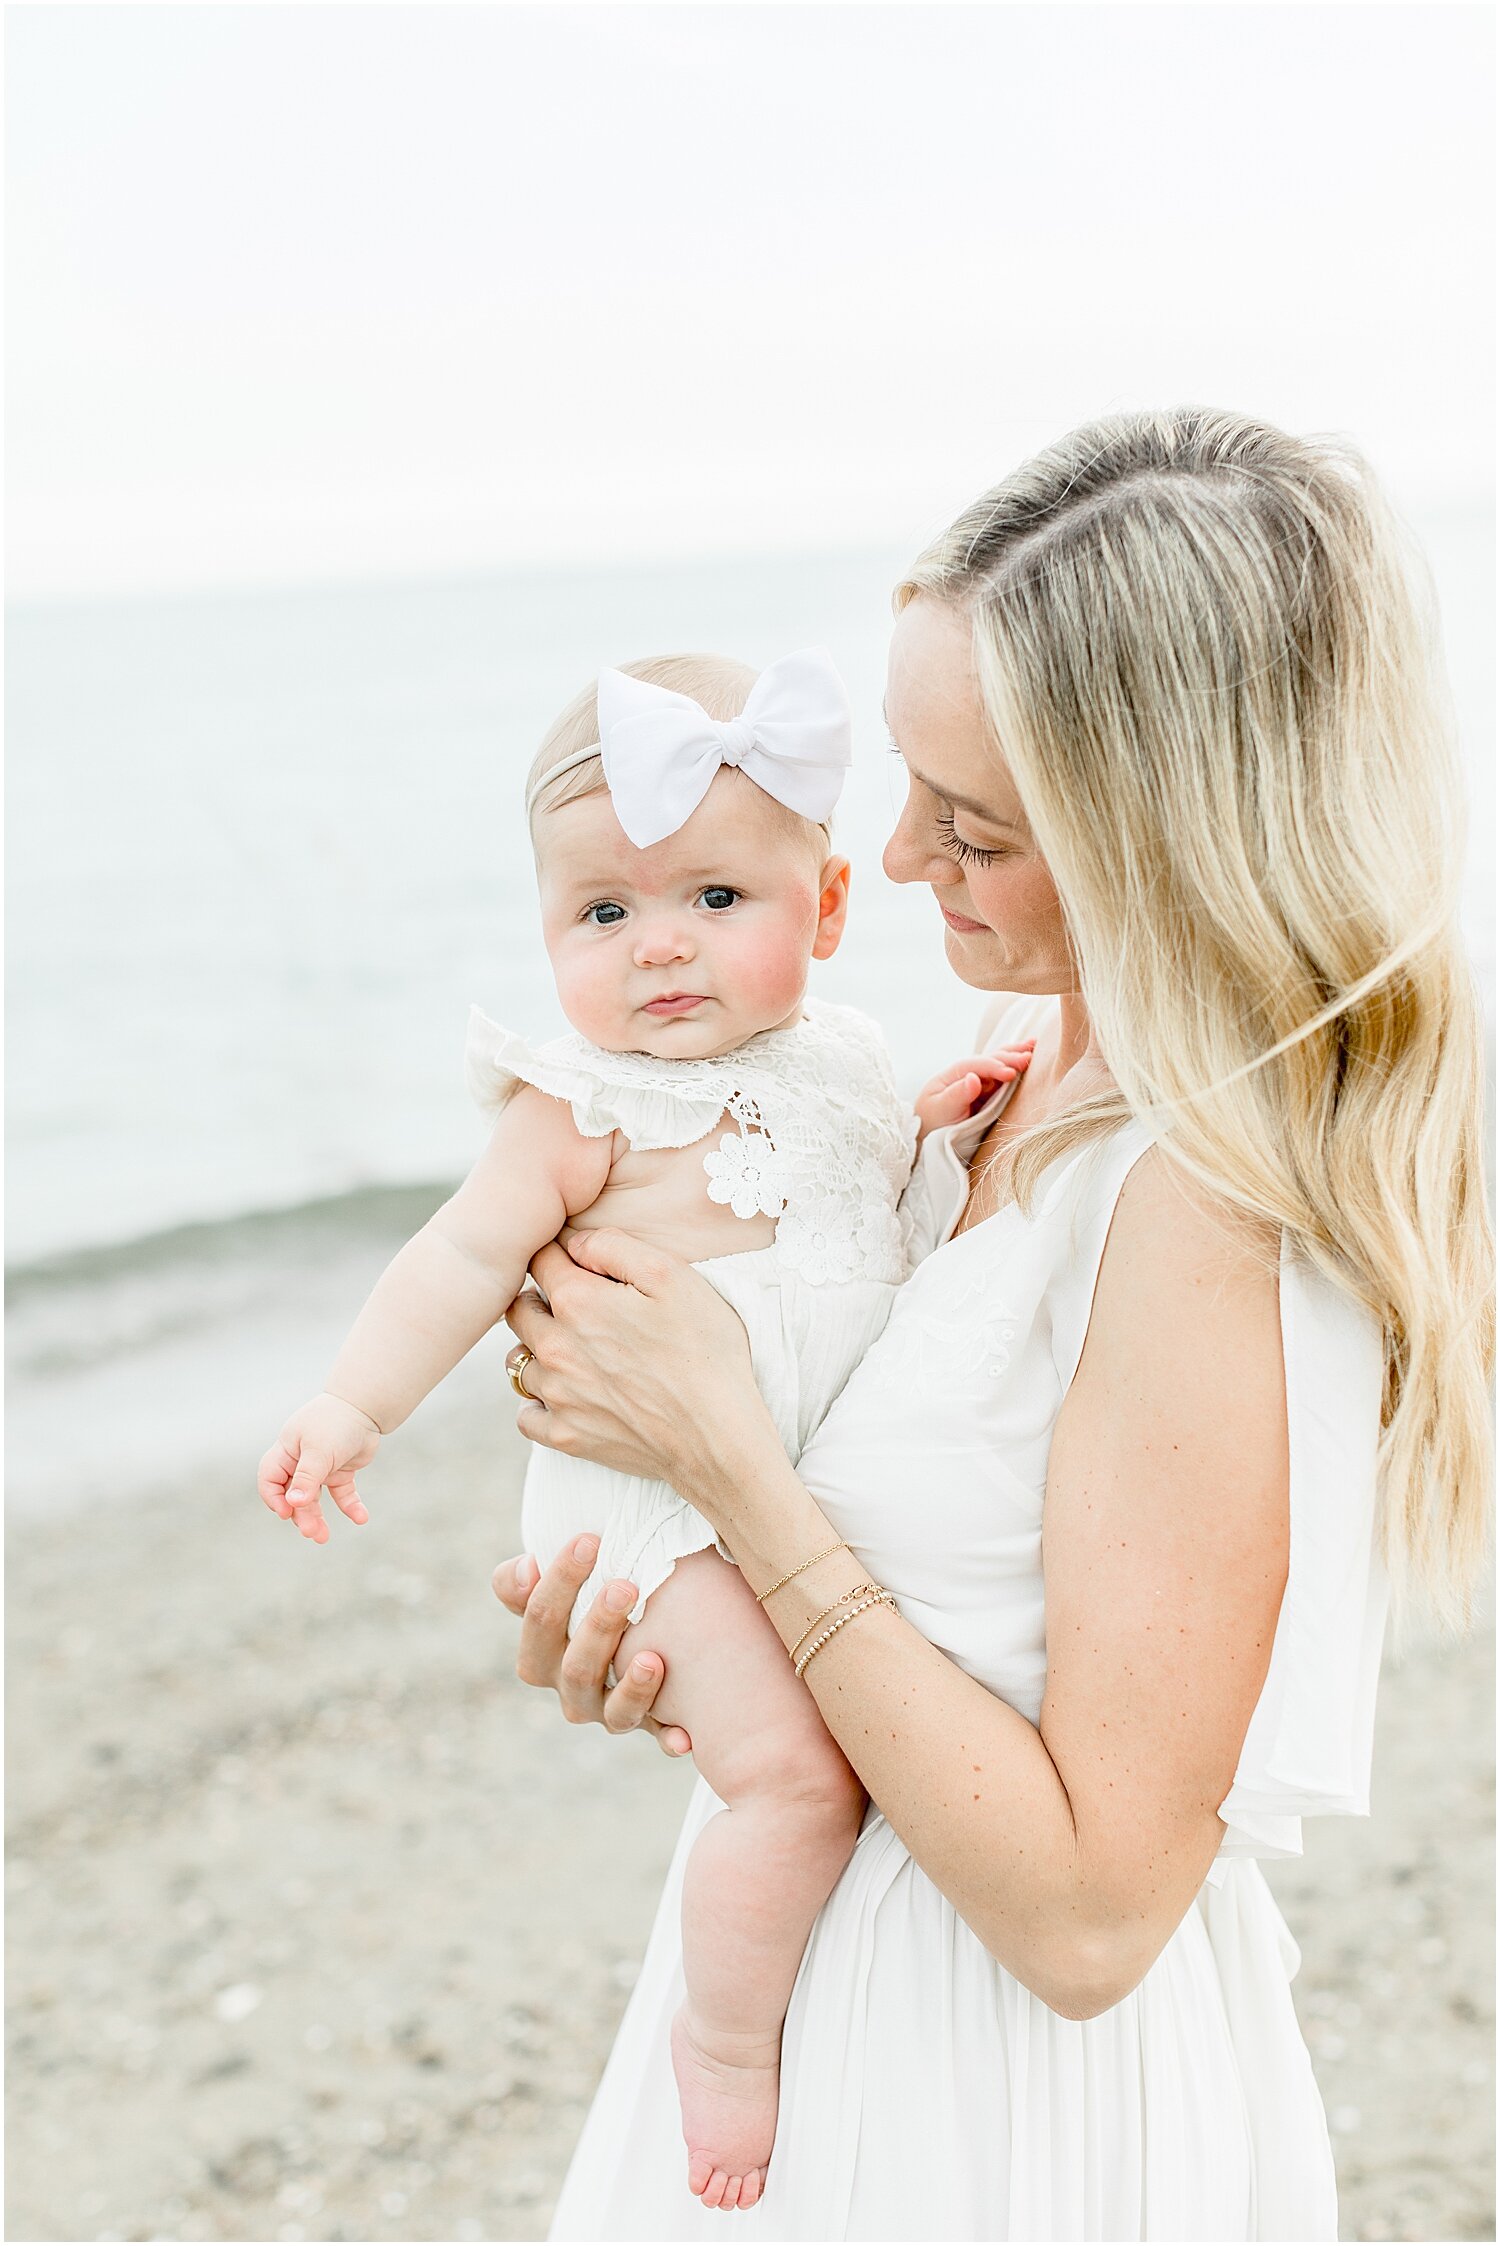 Westport, CT Beach Photoshoot with Family Photographer, Kristin Wood Photography.